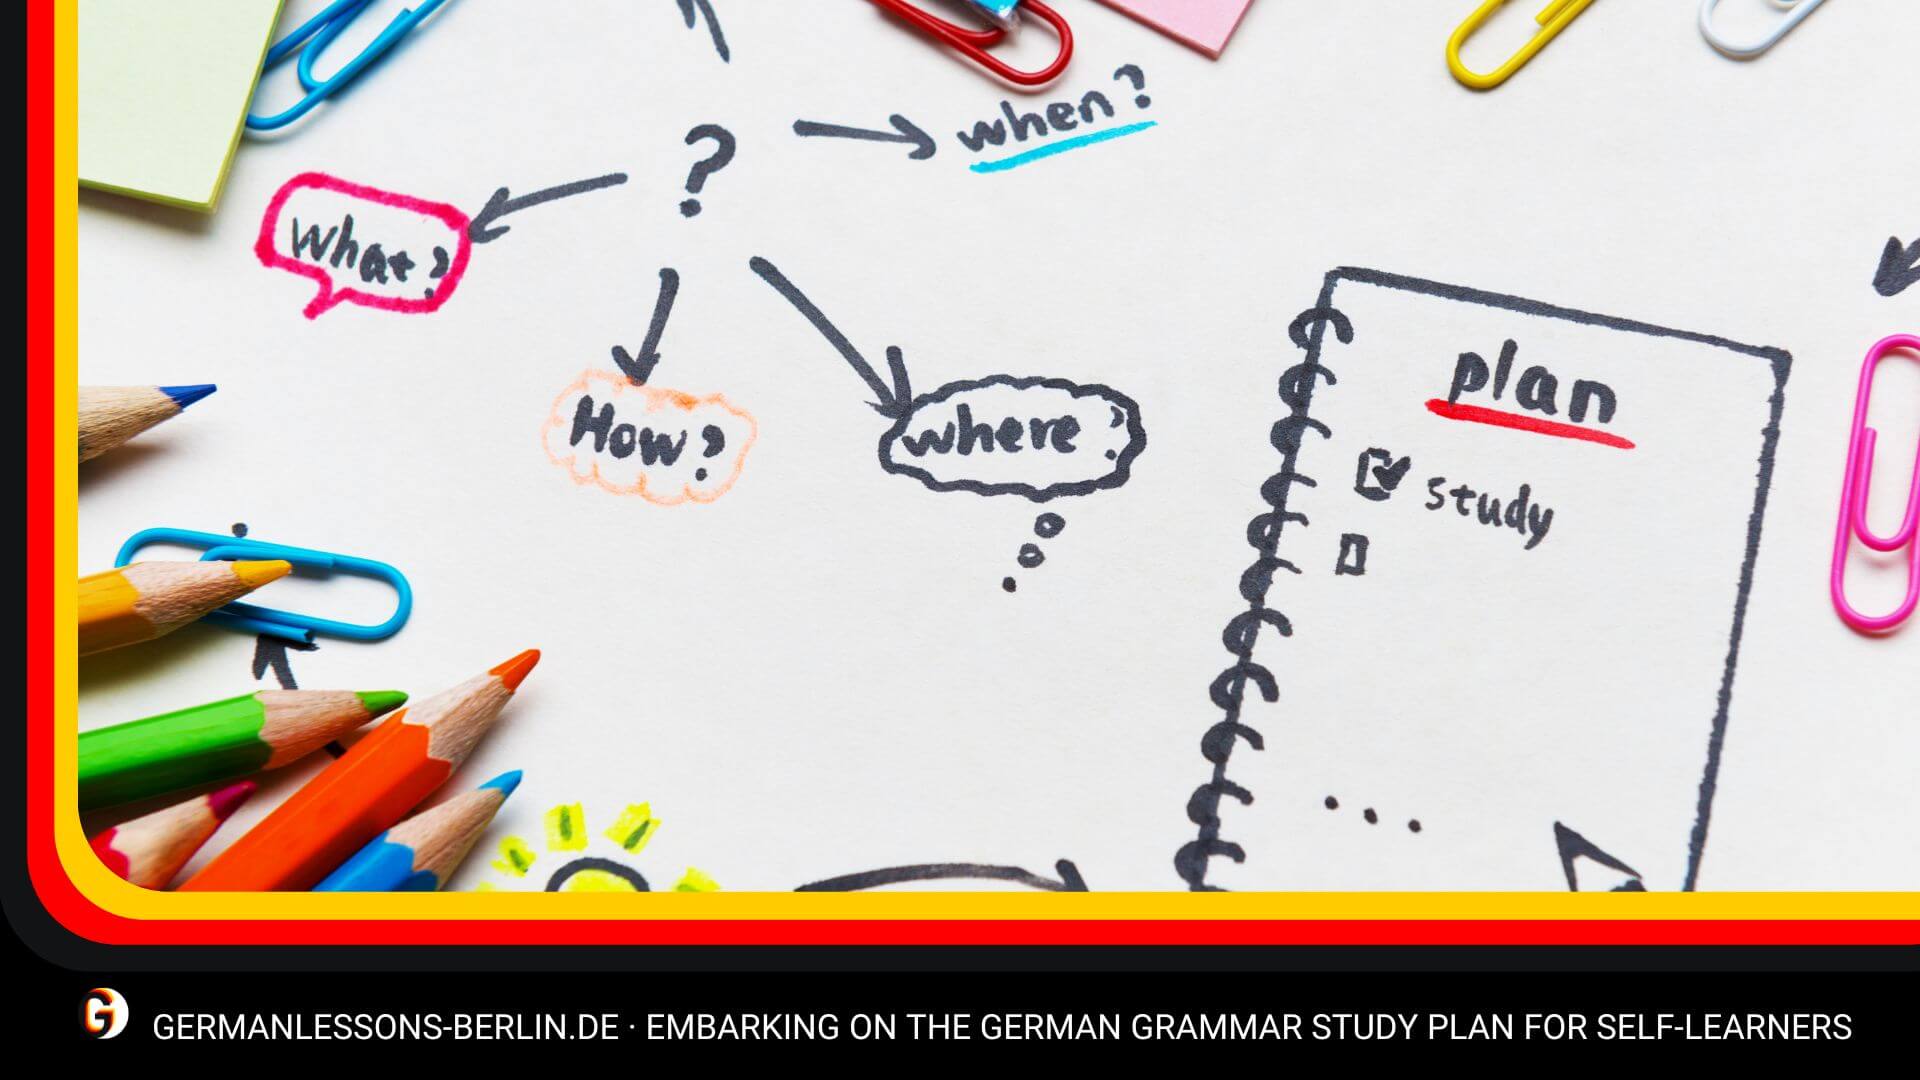 Embarking on the German Grammar Study Plan for Self-Learners